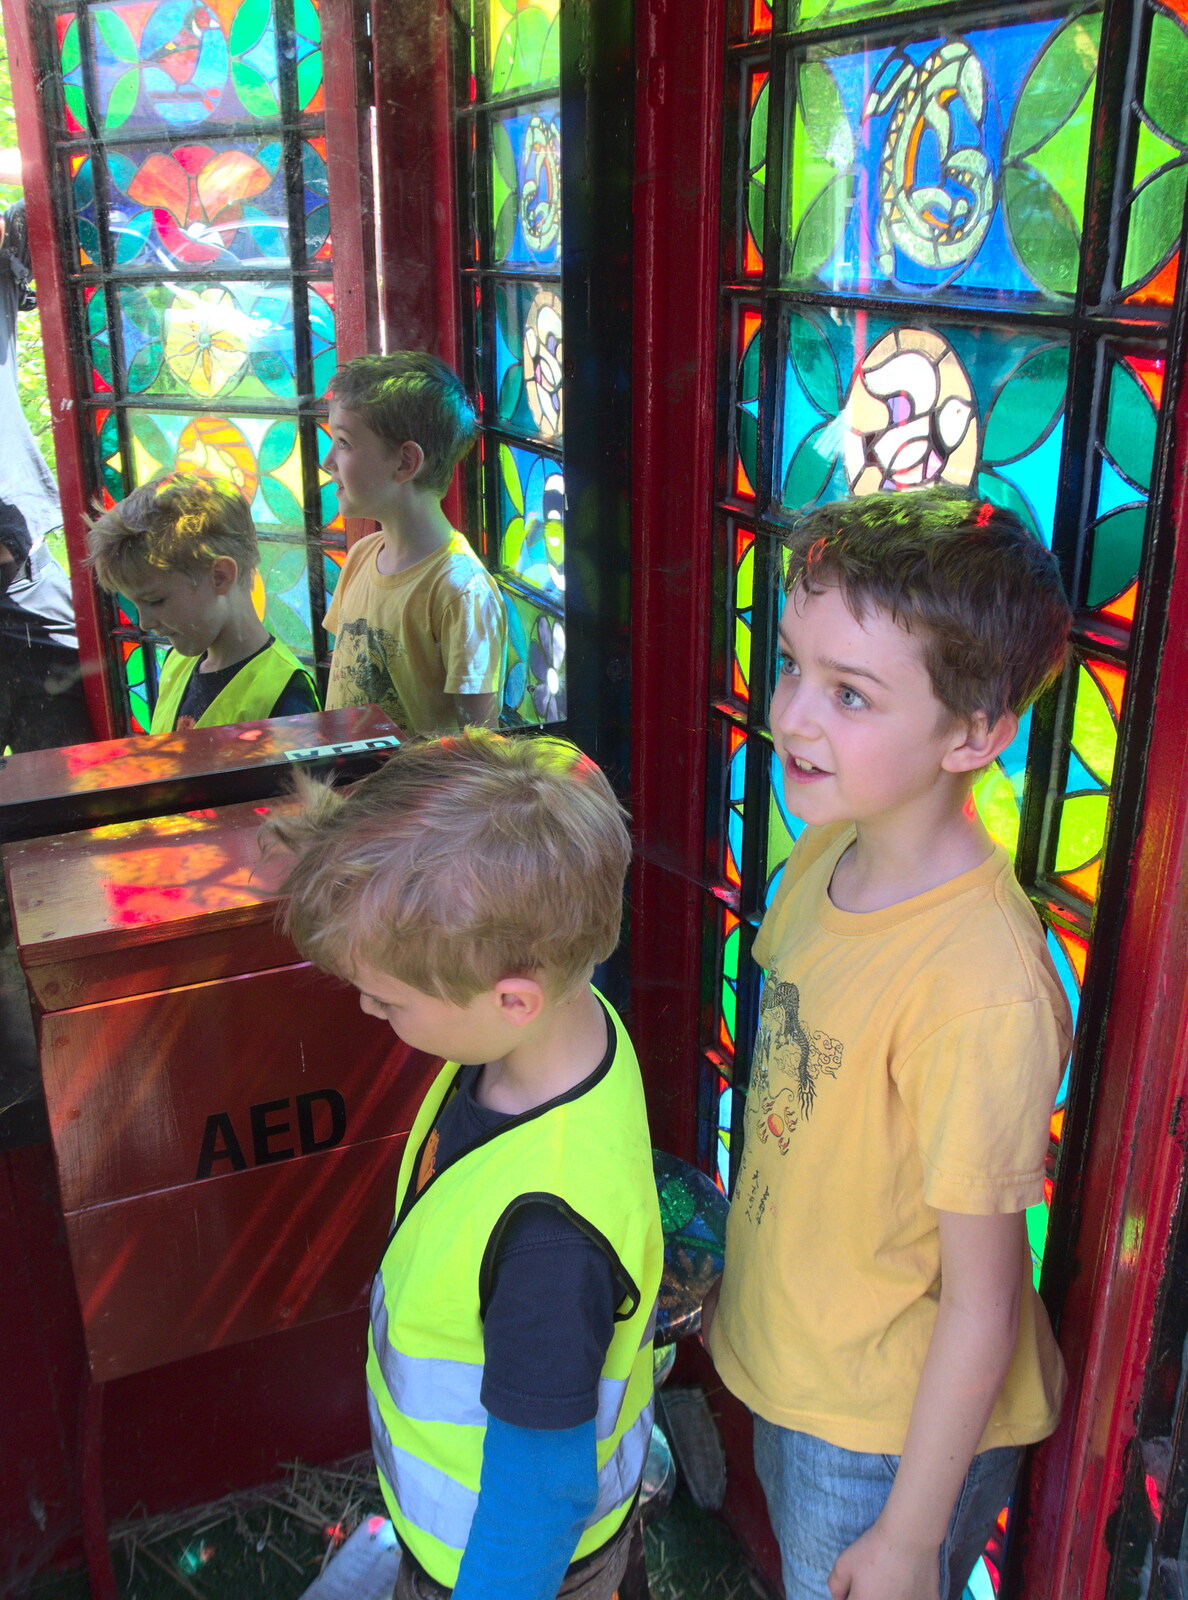 The boys in a K6 phone box from A Bike Ride to the Railway Tavern, Mellis, Suffolk - 7th May 2018